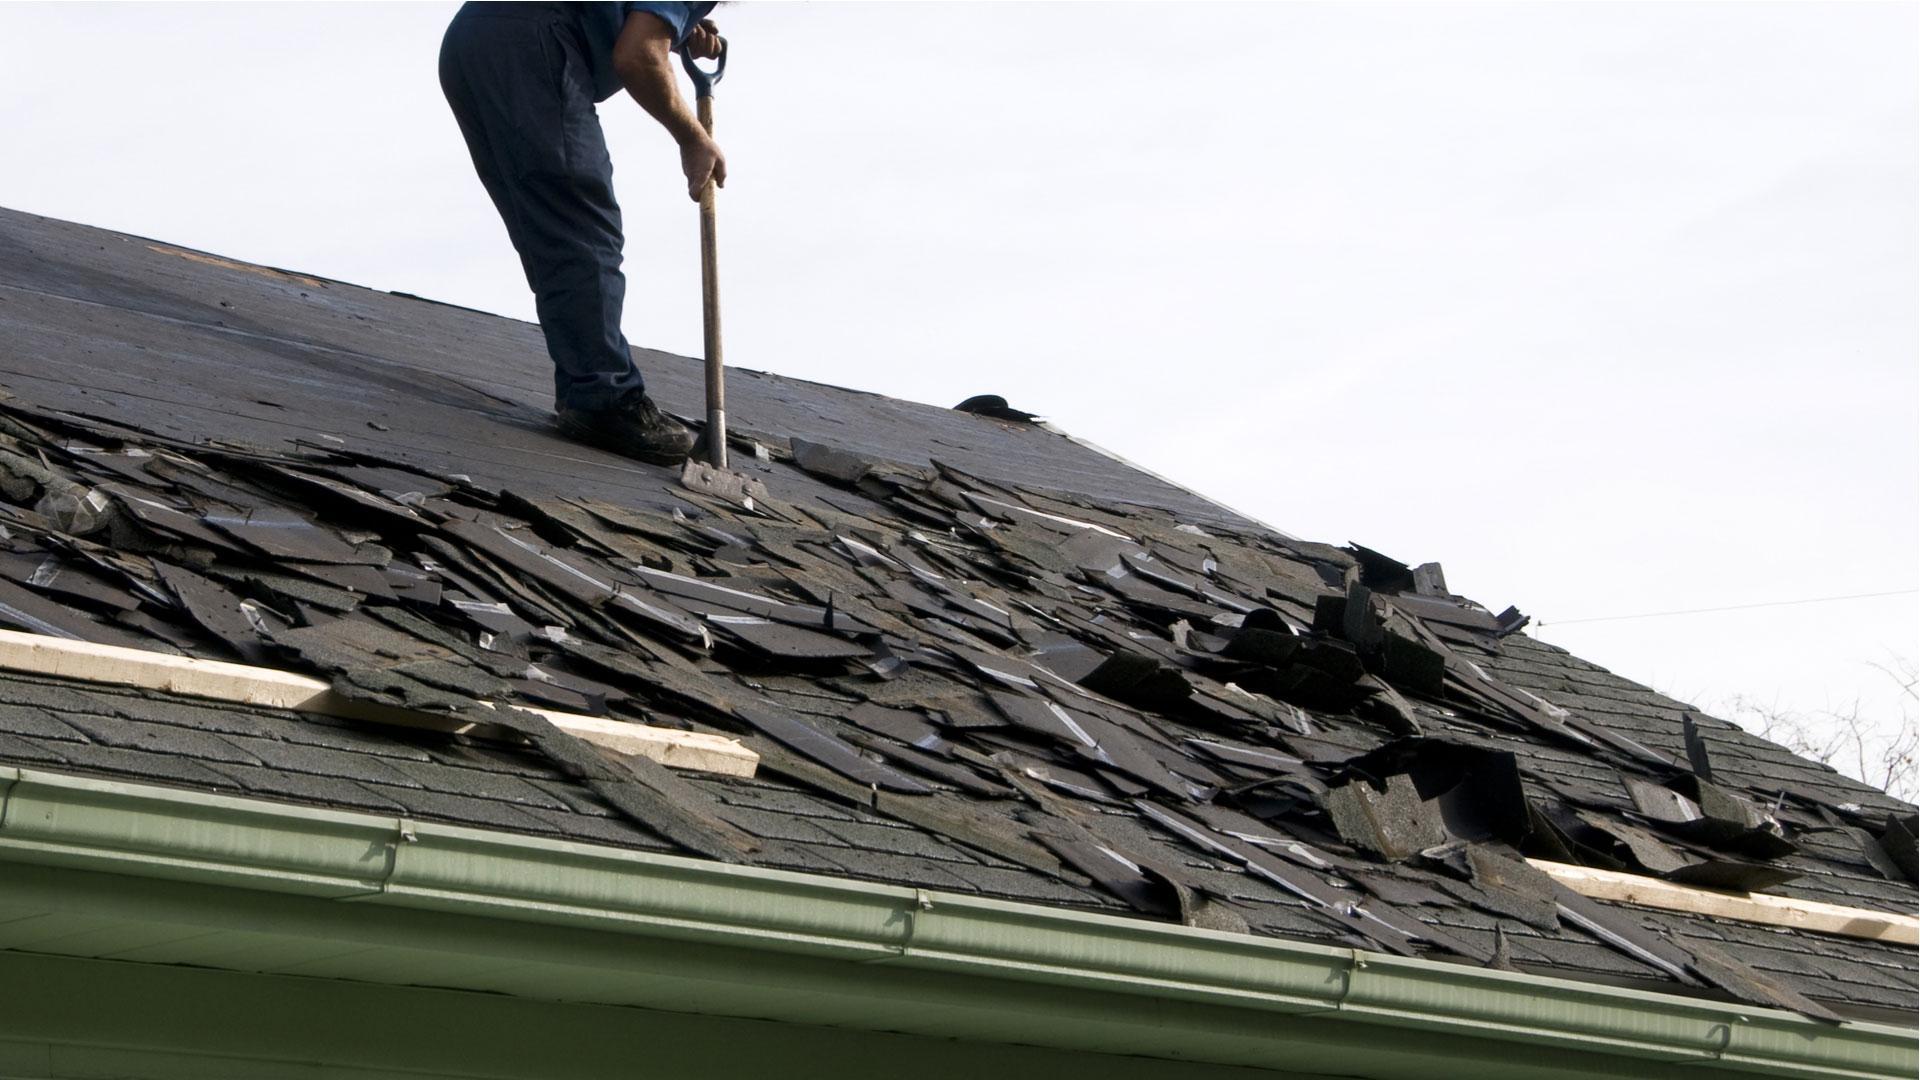 Sugarland houston roofing contractor replacing roof